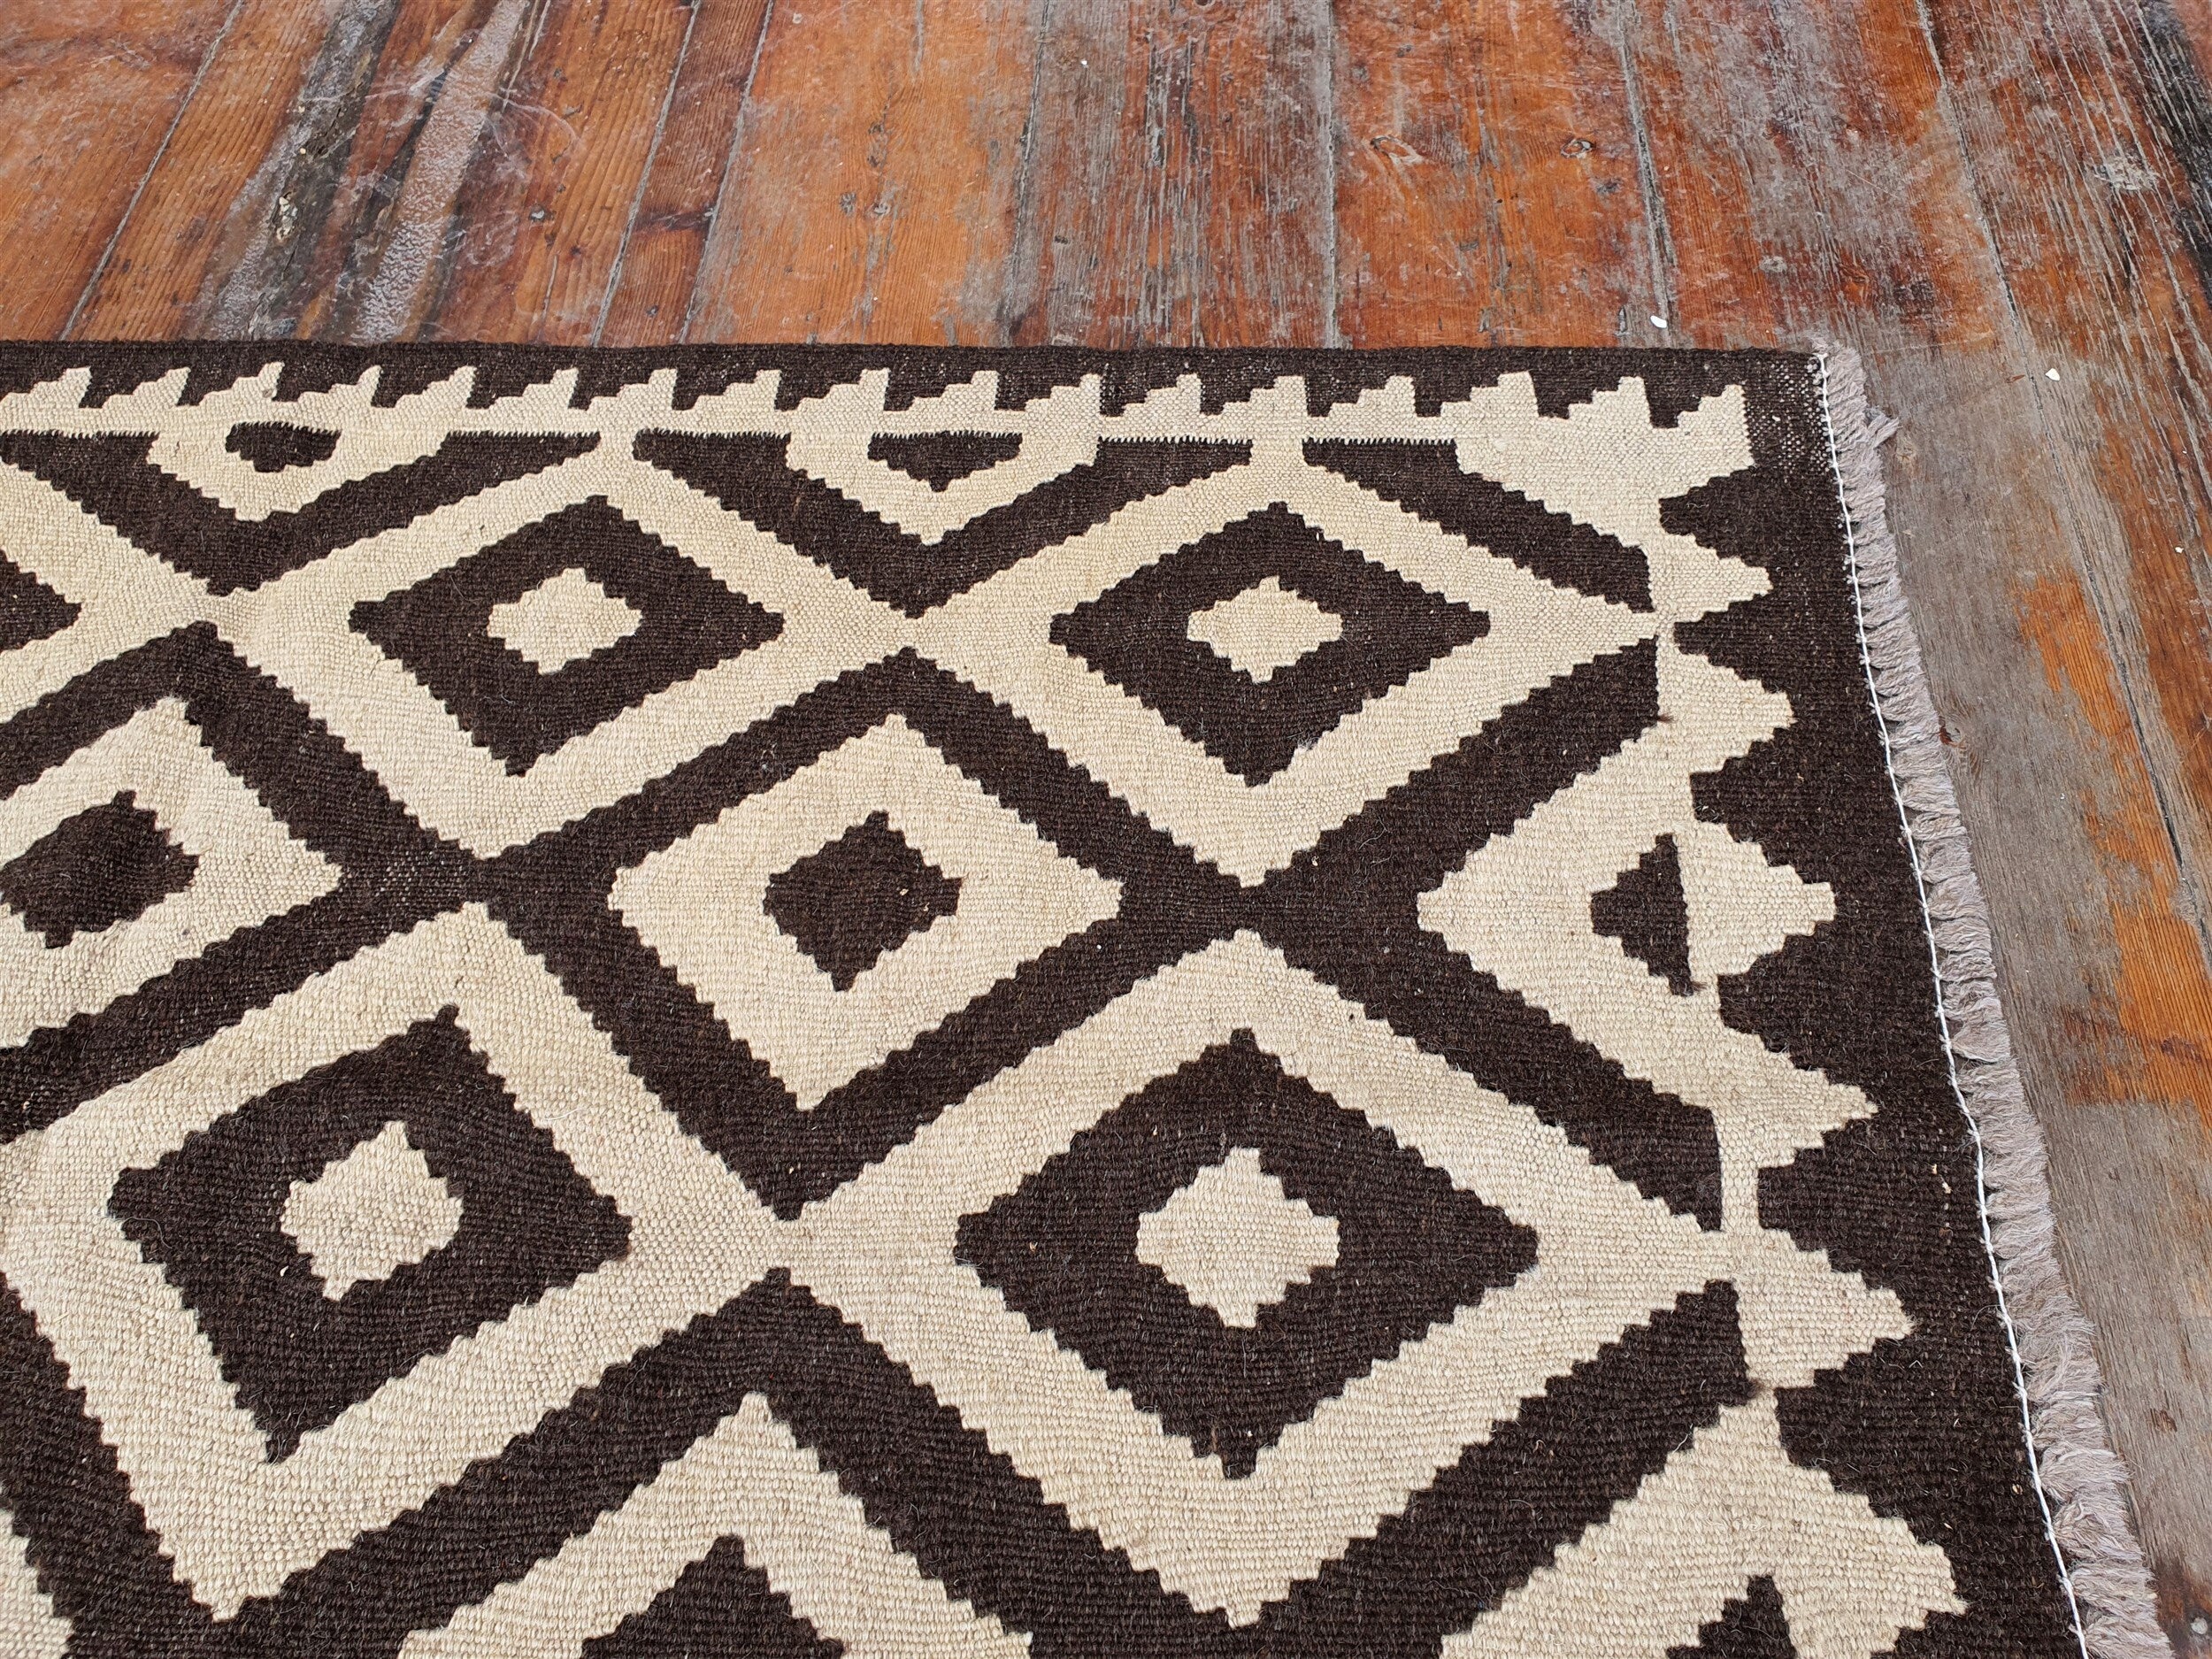 Afghan Kilim Rug 4 ft 9 in x 3 ft 2 in Brown and Off-White Moroccan Style Rug